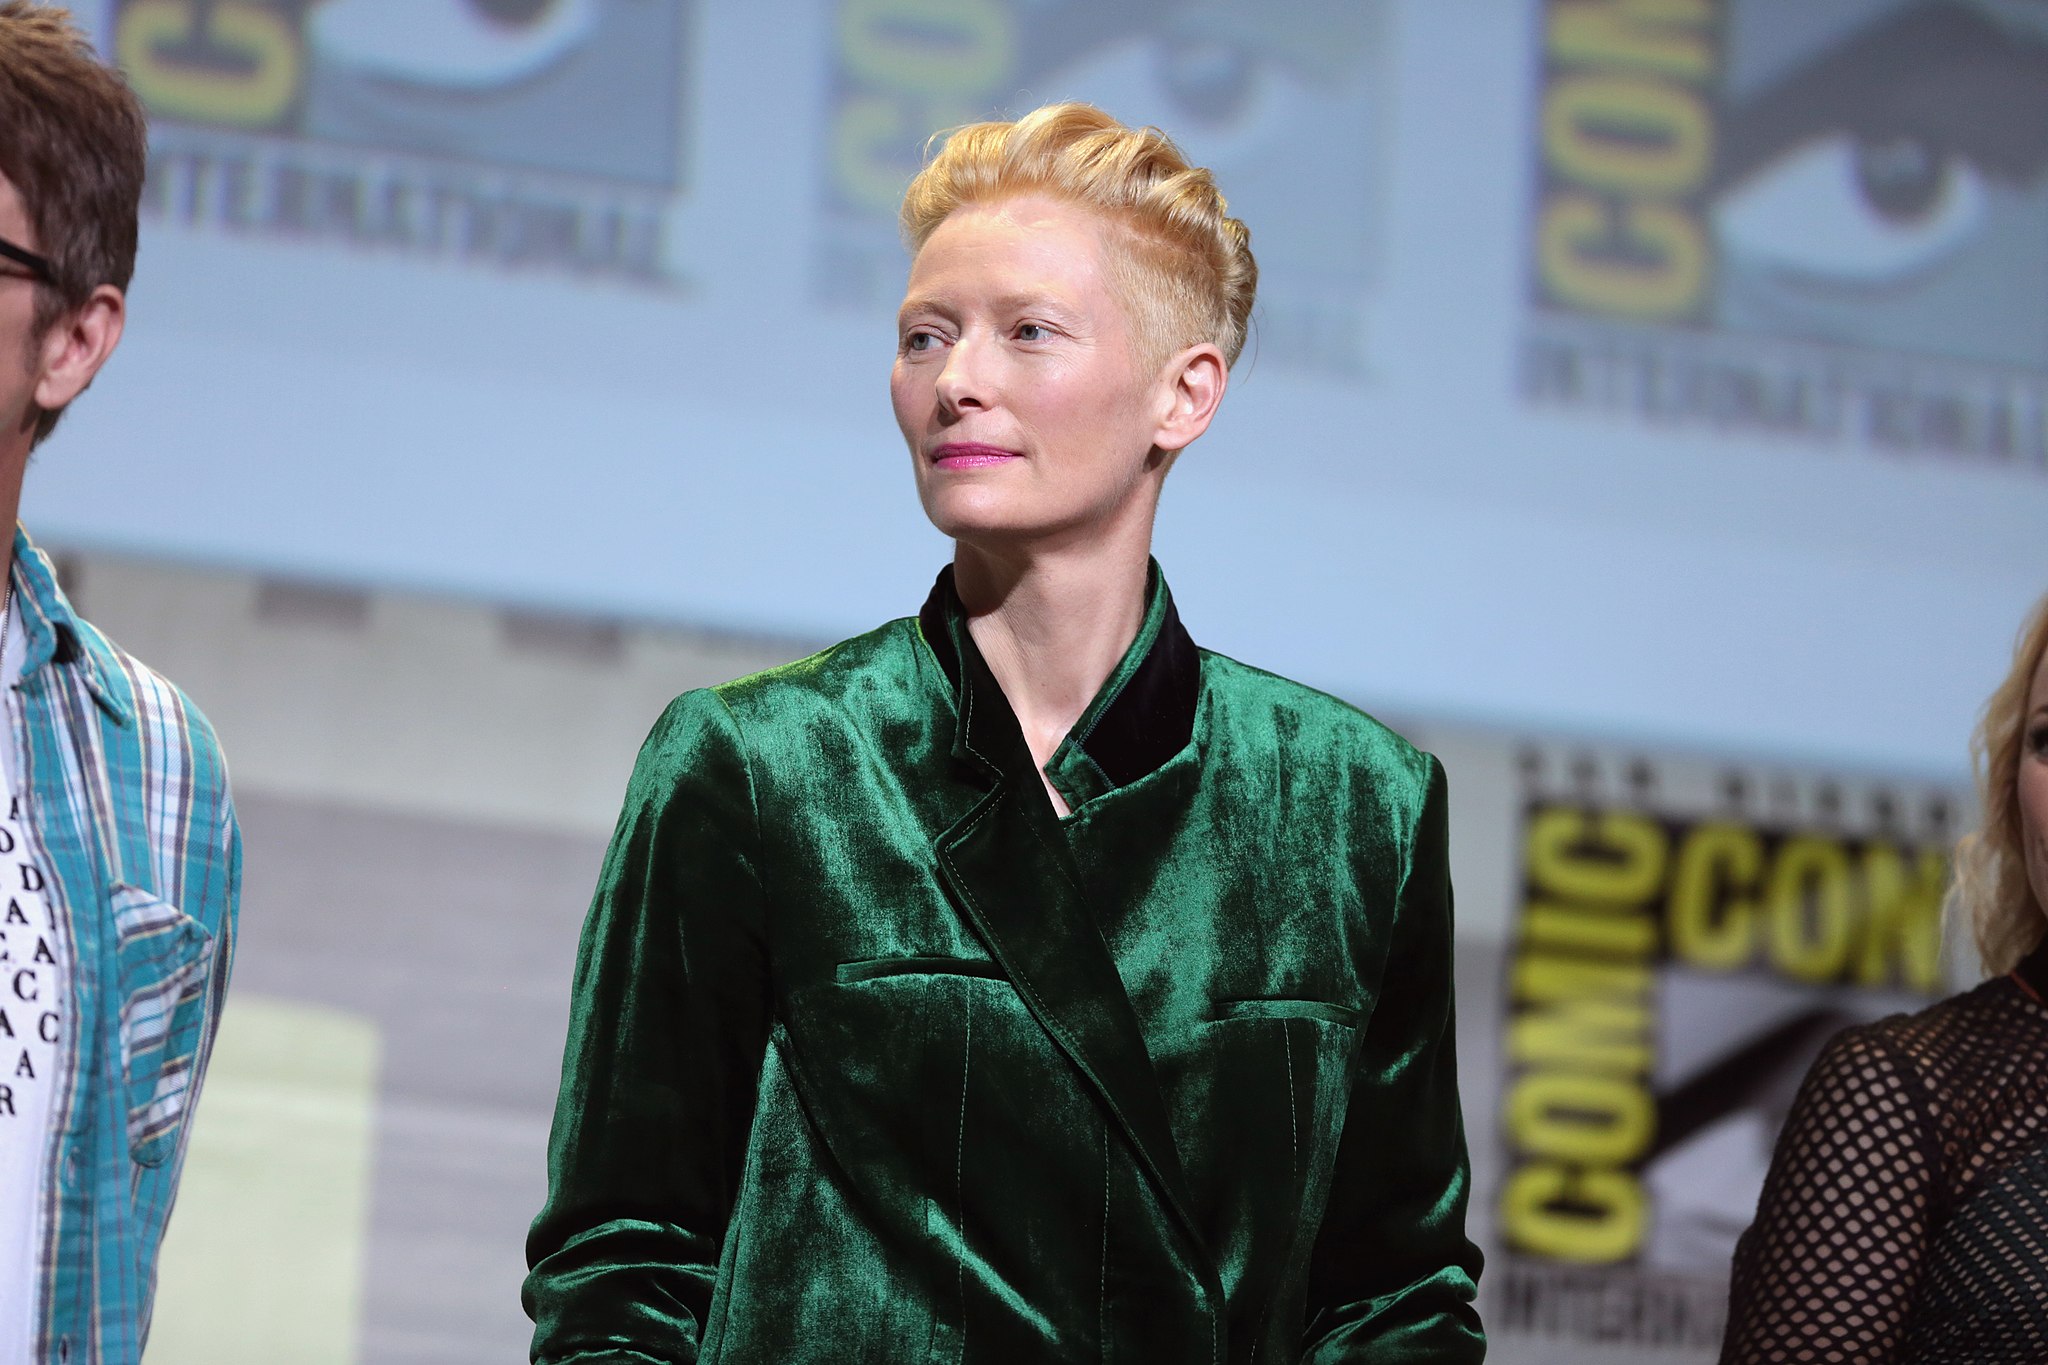 And finally... Locals force Tilda Swinton back to drawing board